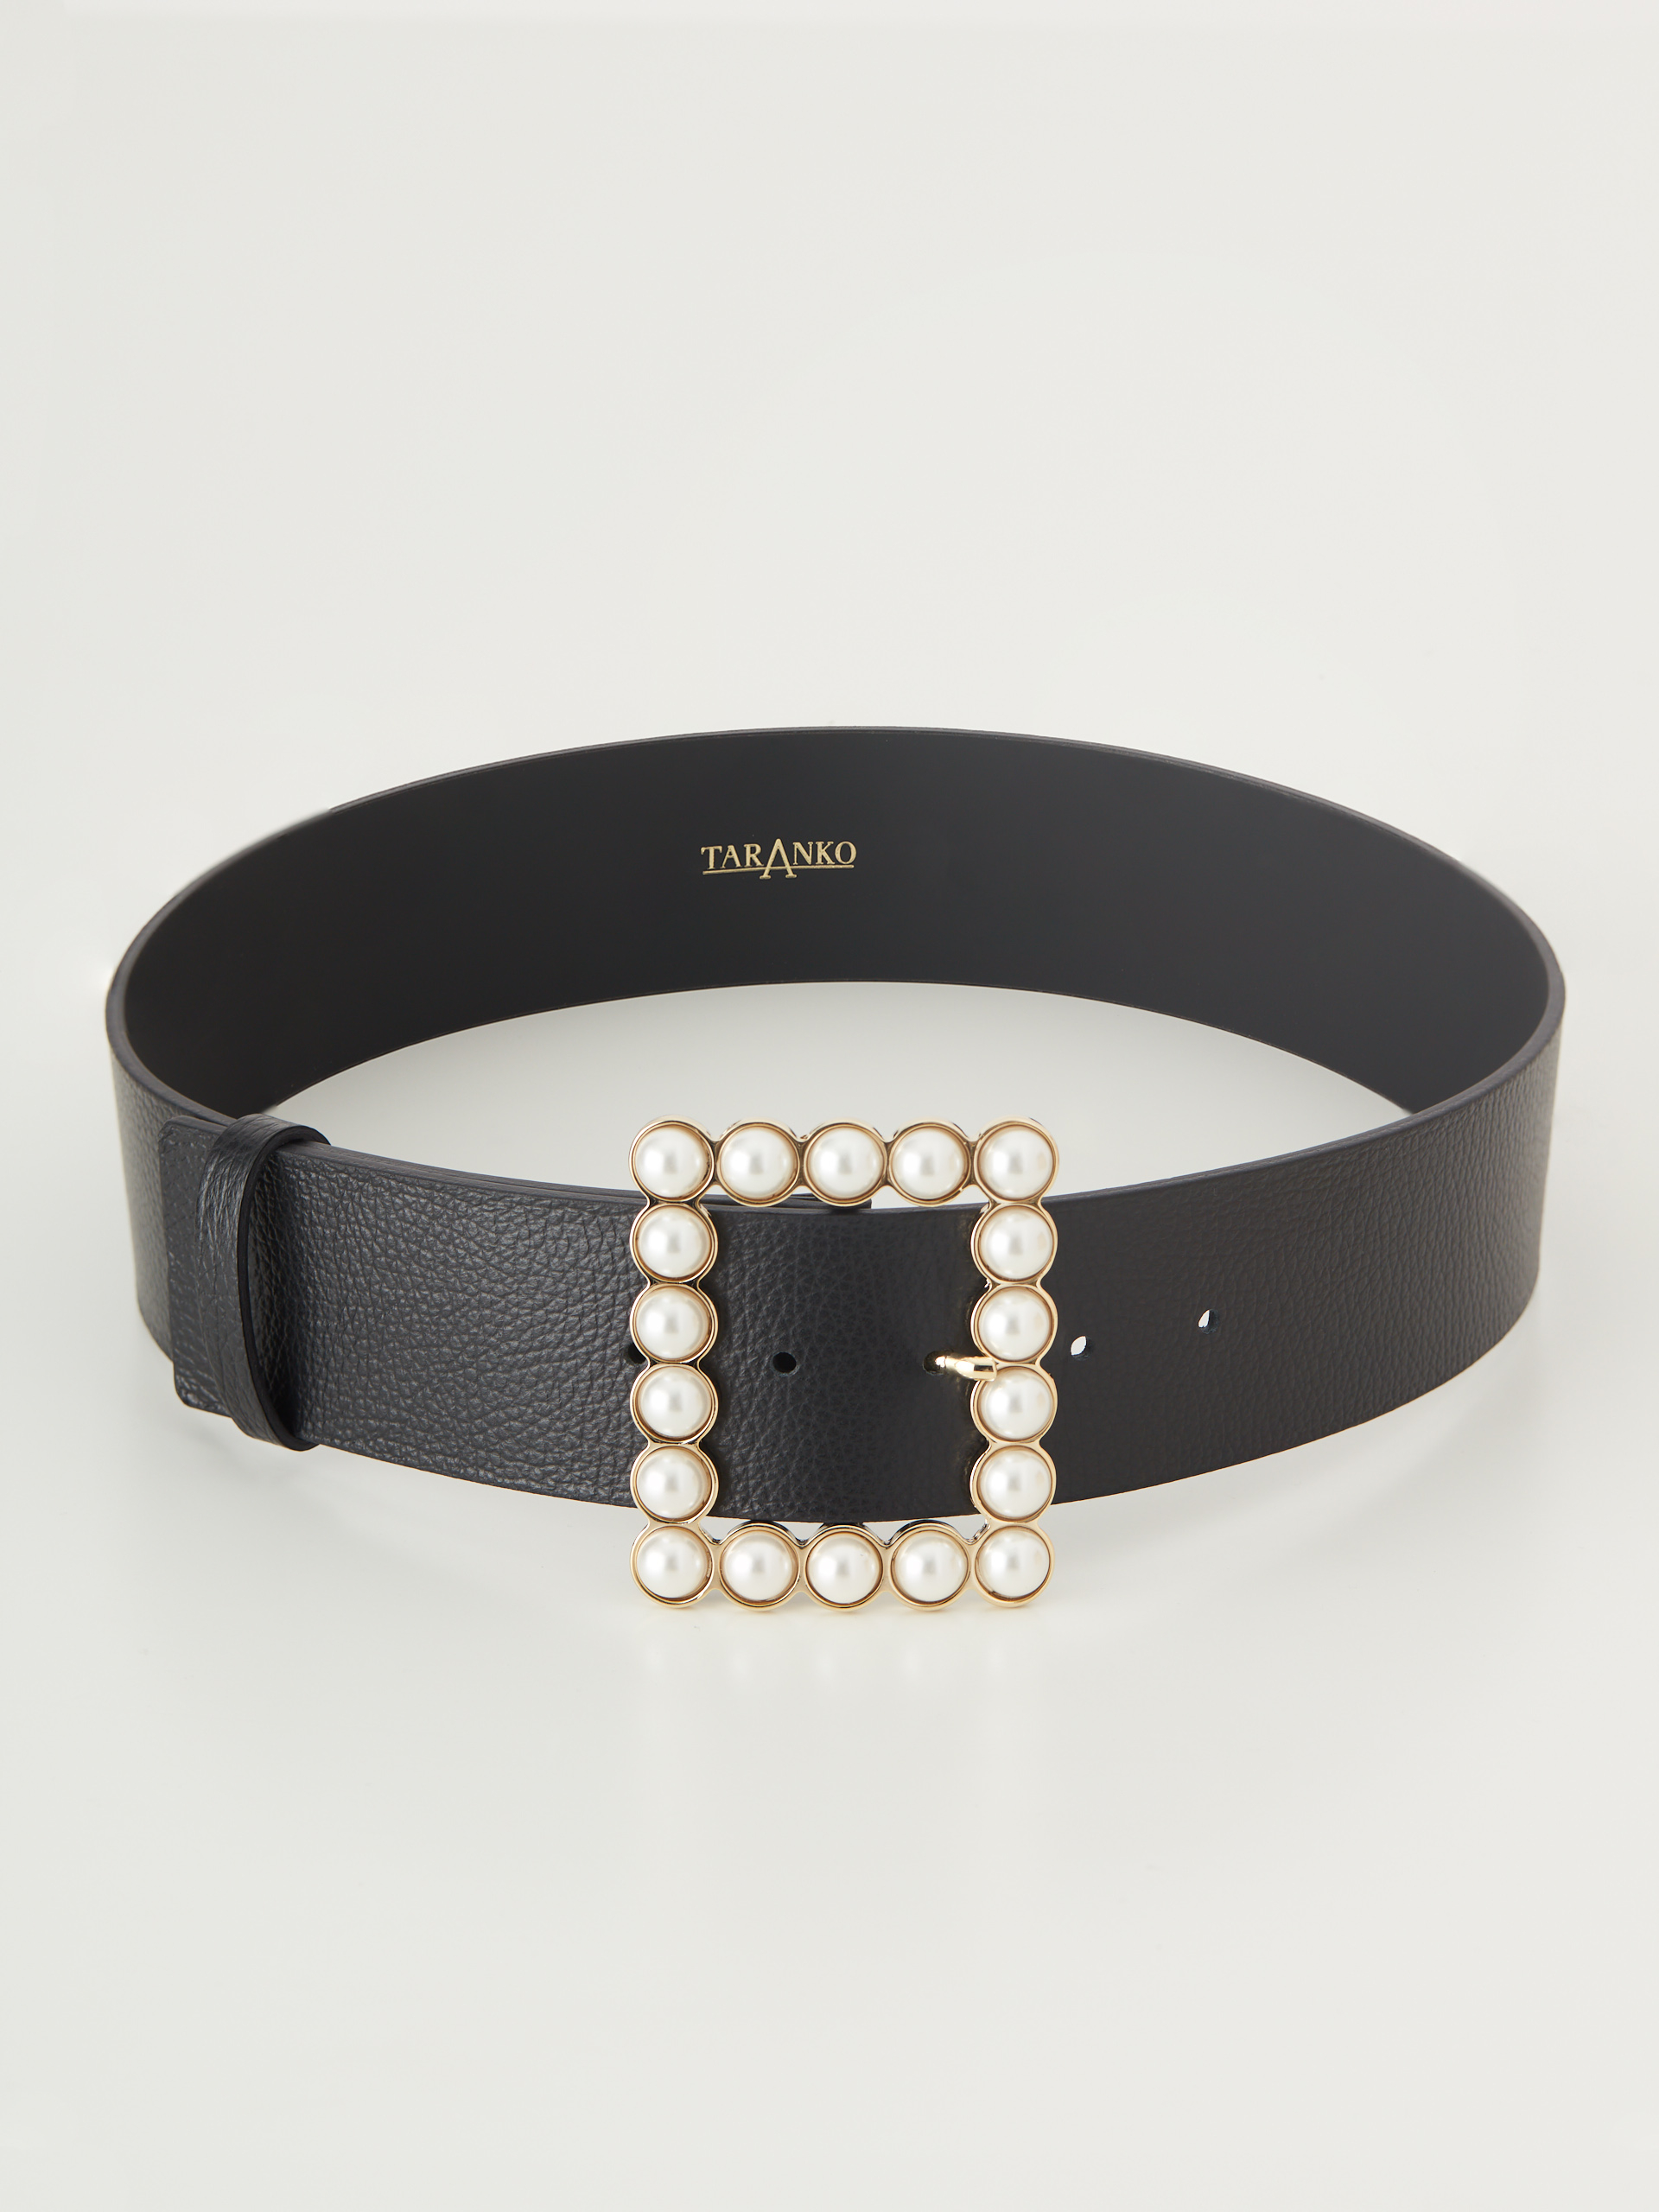 Wide belt with pearl buckle